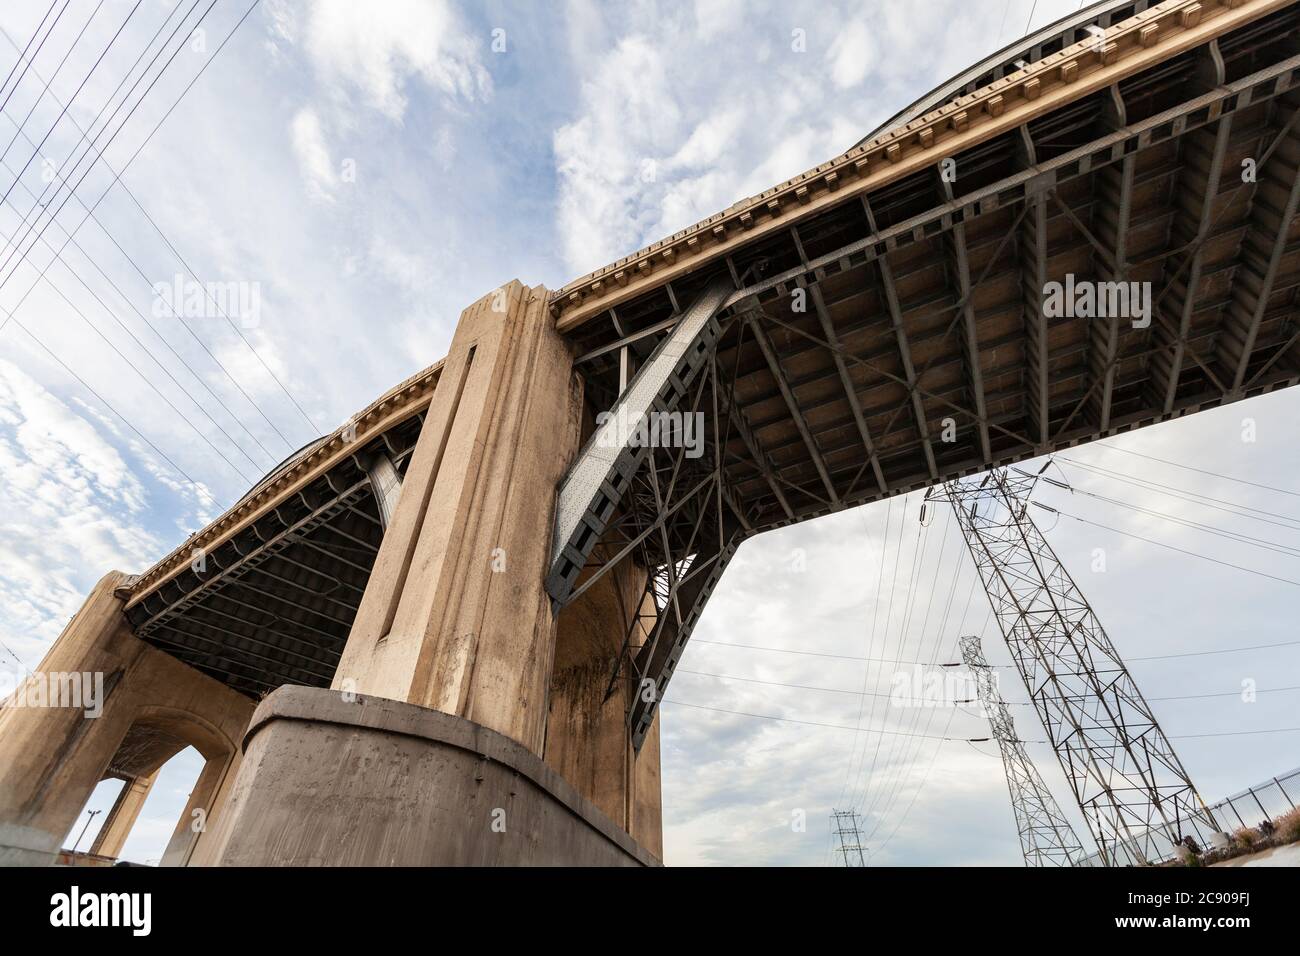 Under the historic and now demolished 6th street bridge near downtown Los Angeles in Southern California. Stock Photo